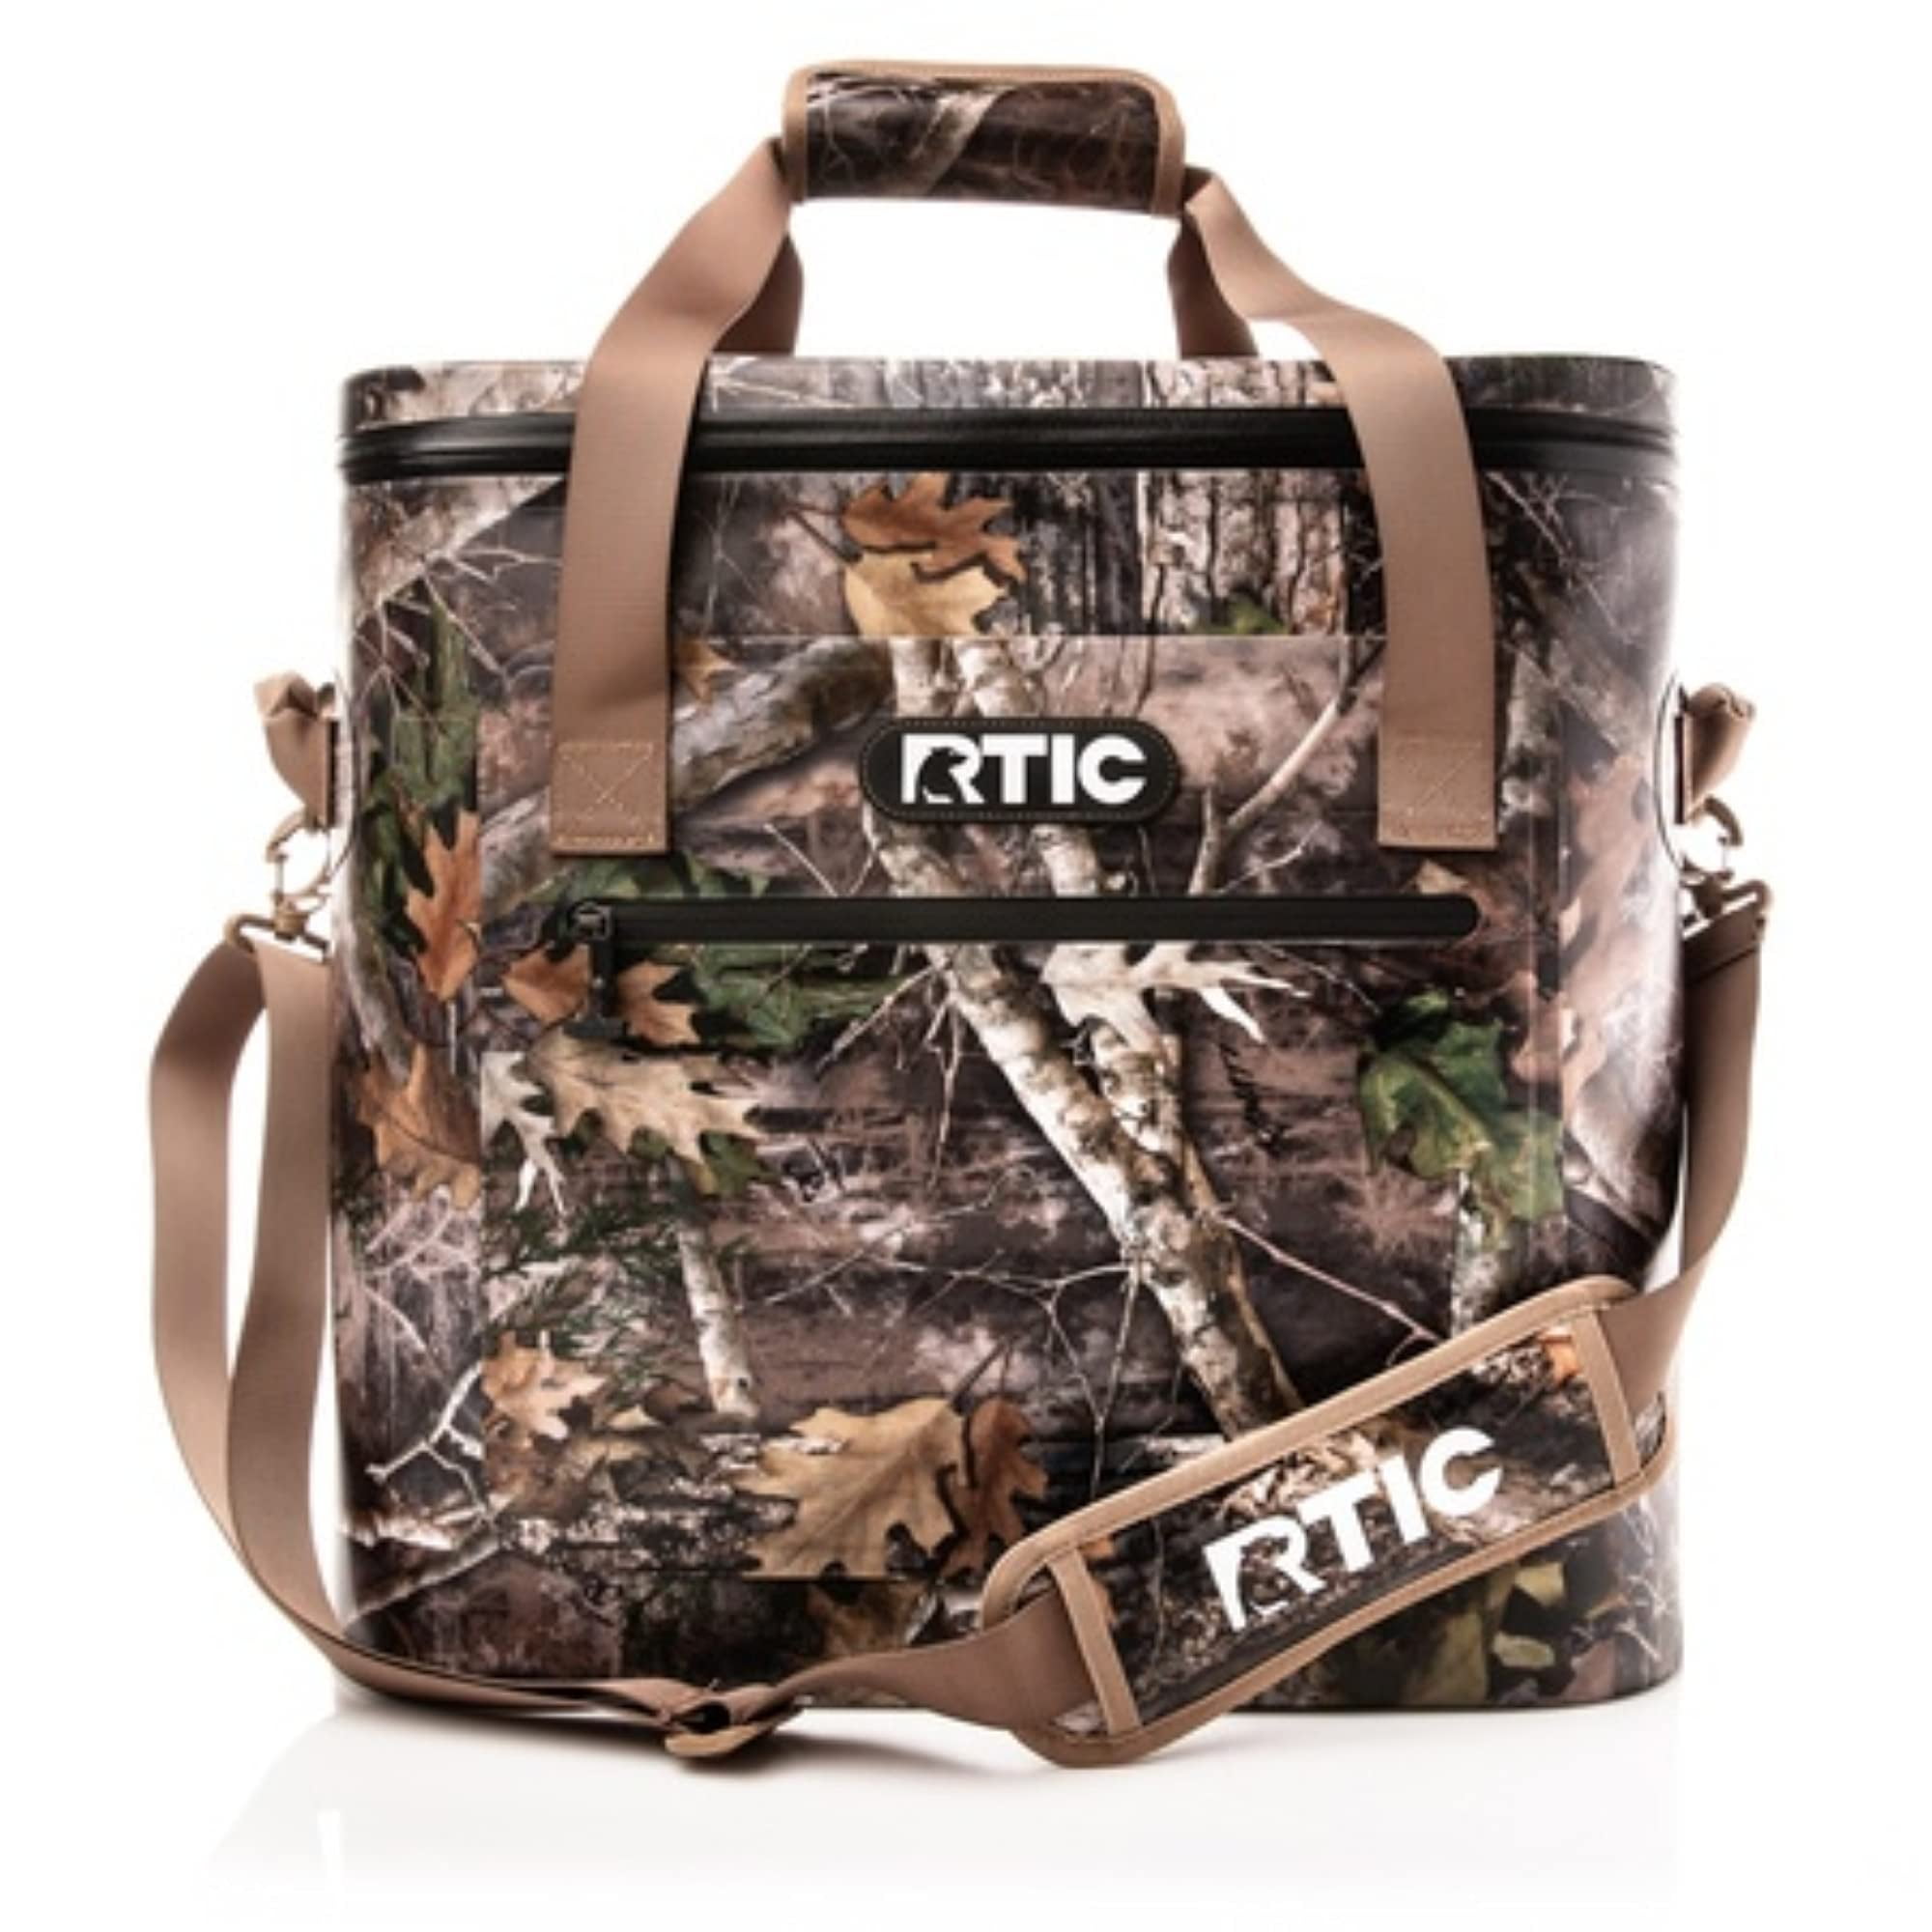 RTIC Soft Cooler 40 Can, Insulated Bag Portable Ice Chest Box for